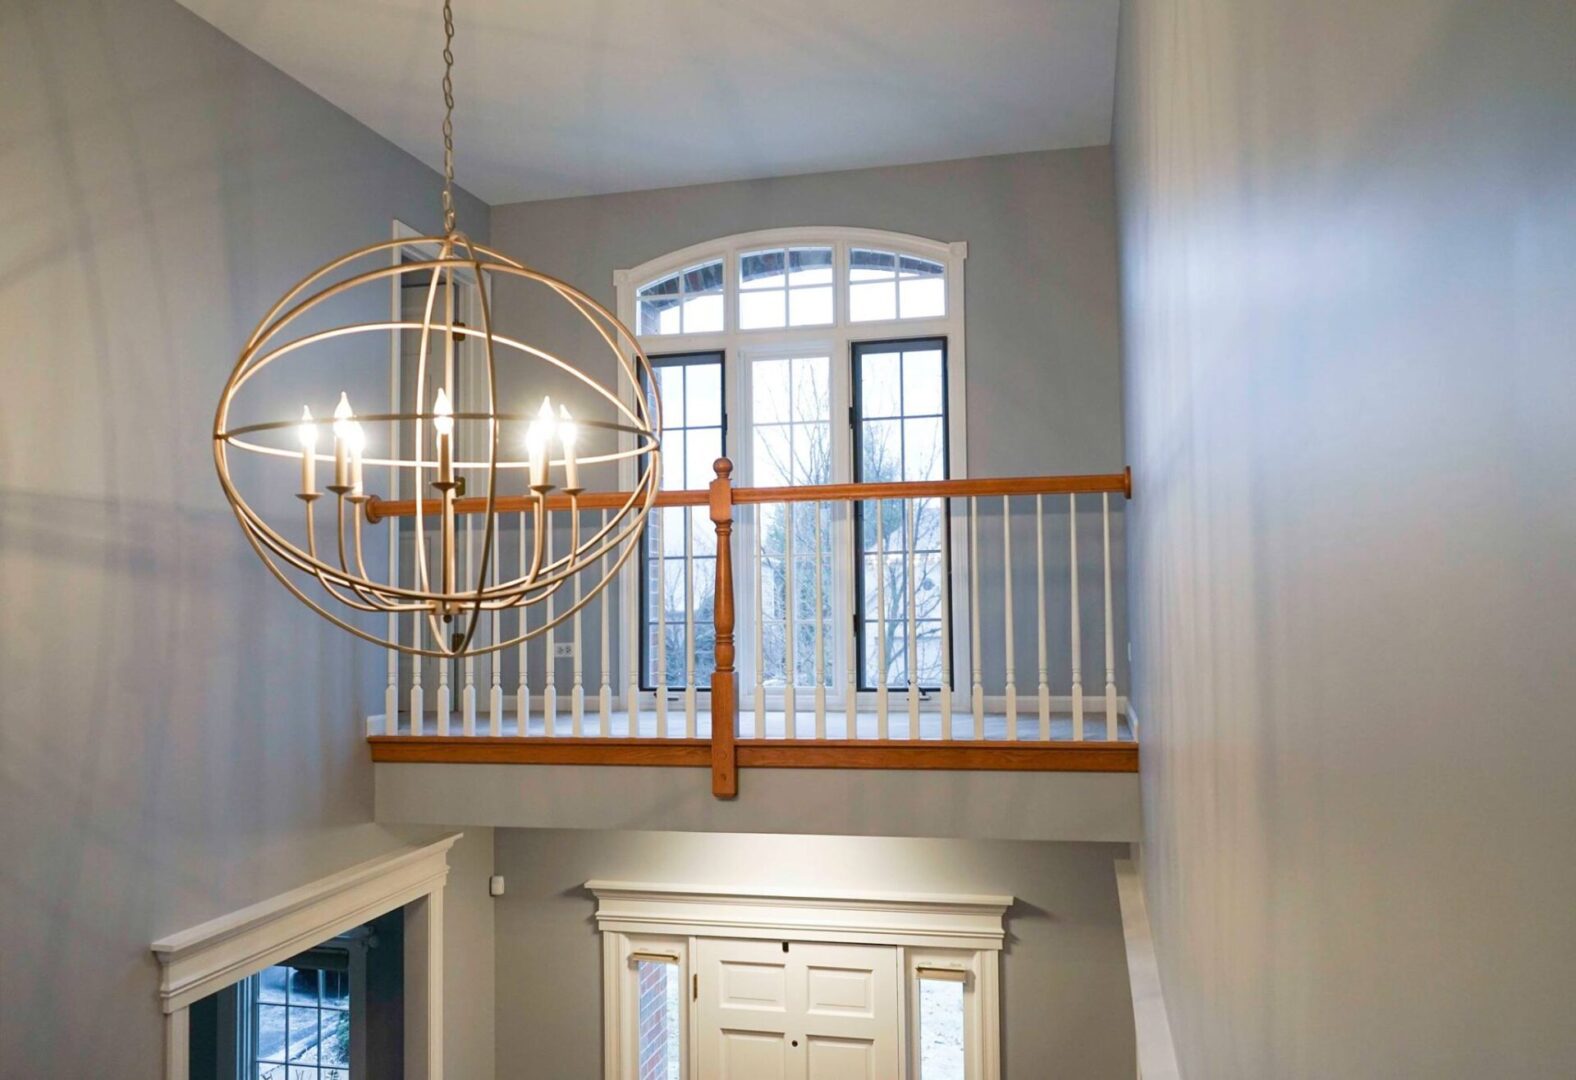 A large foyer with two floors and a chandelier.